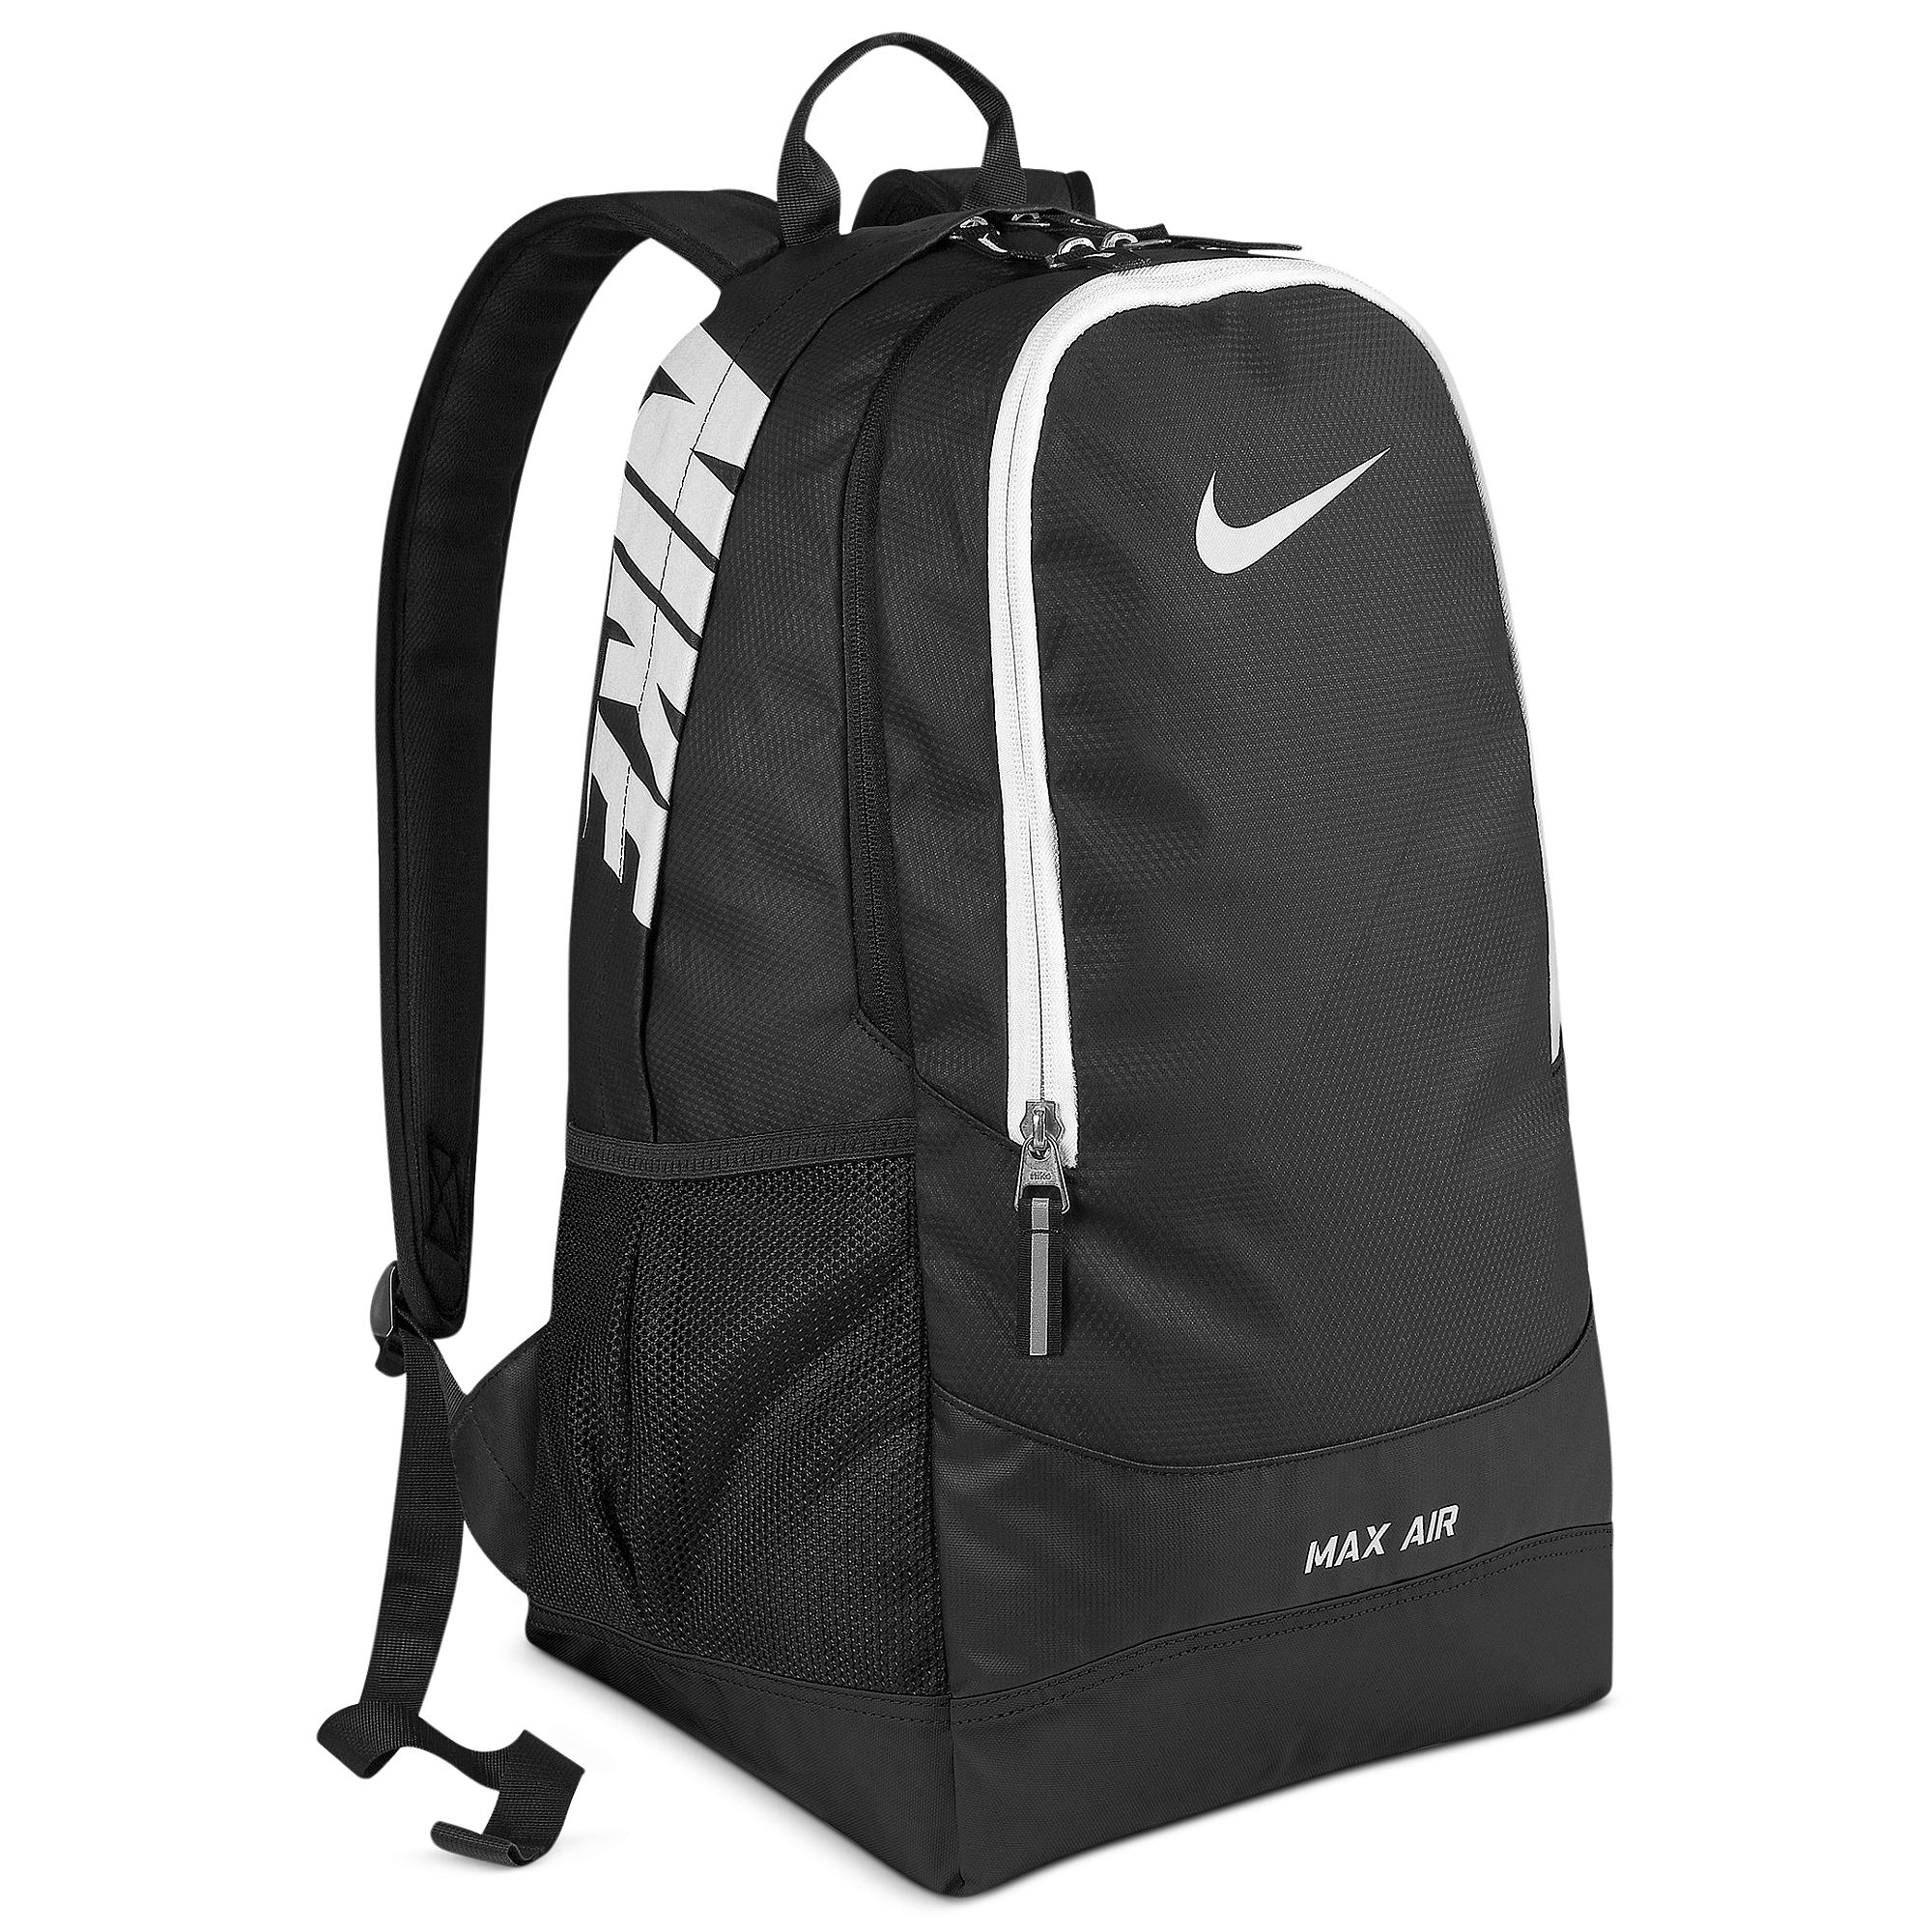 Lyst - Nike Team Training Max Air Large Backpack in Black for Men